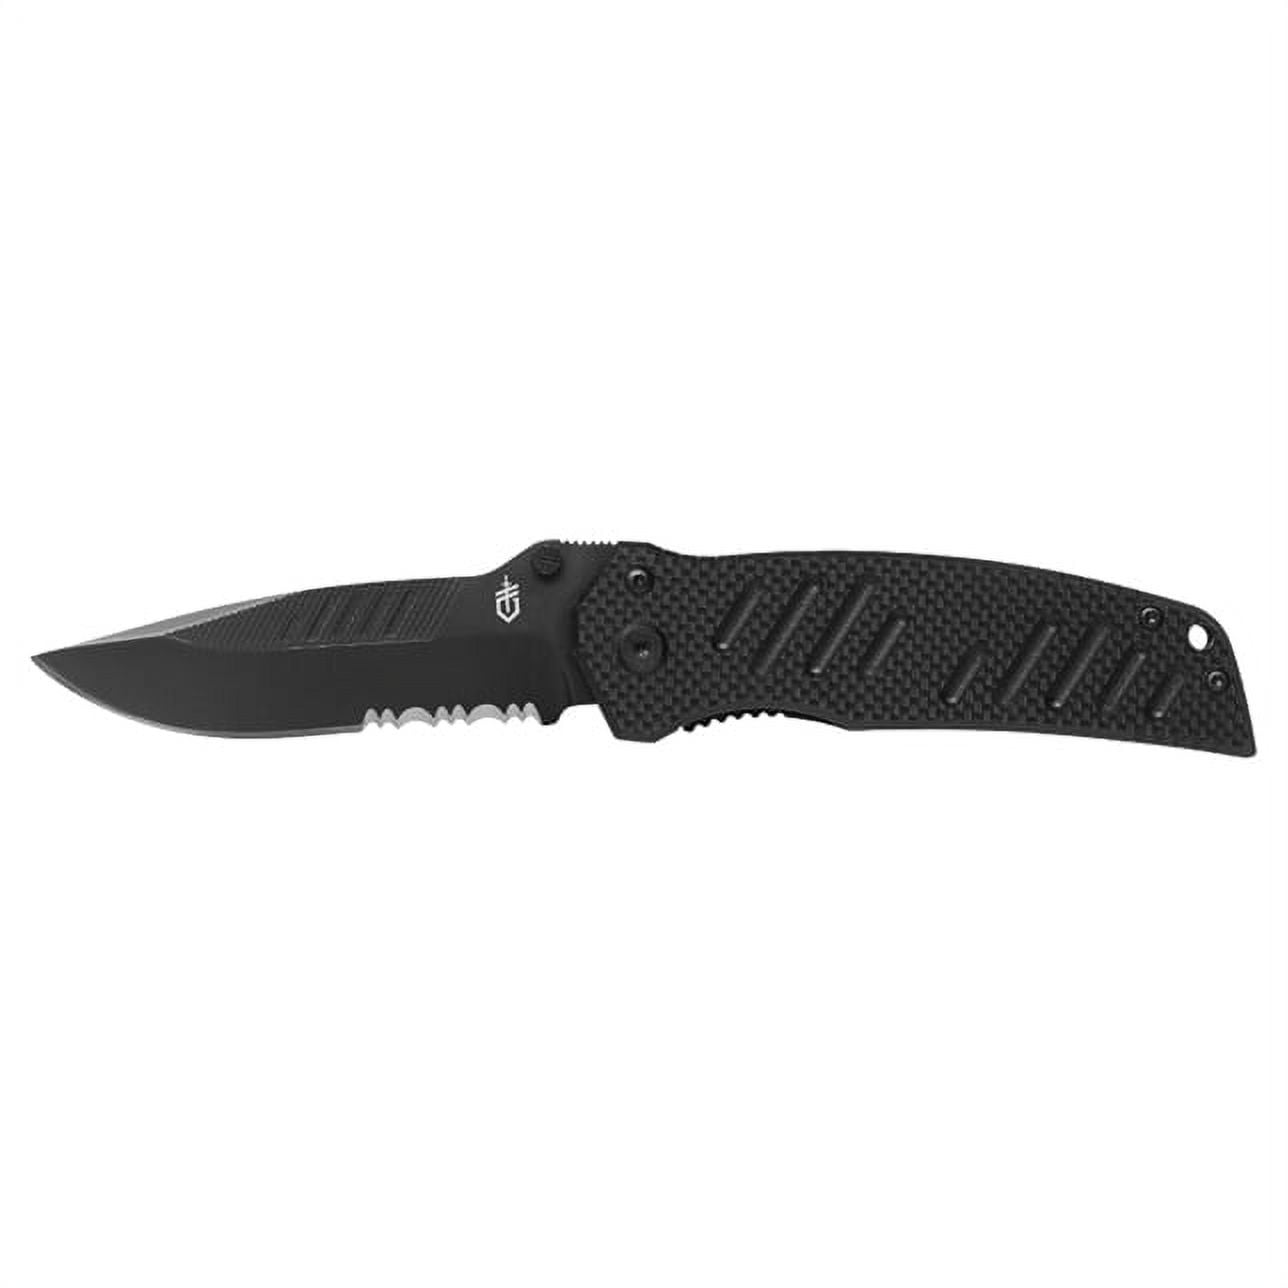 Gerber Swagger Knife, Black, Serrated Edge, Drop Point, G-10 Handle ...